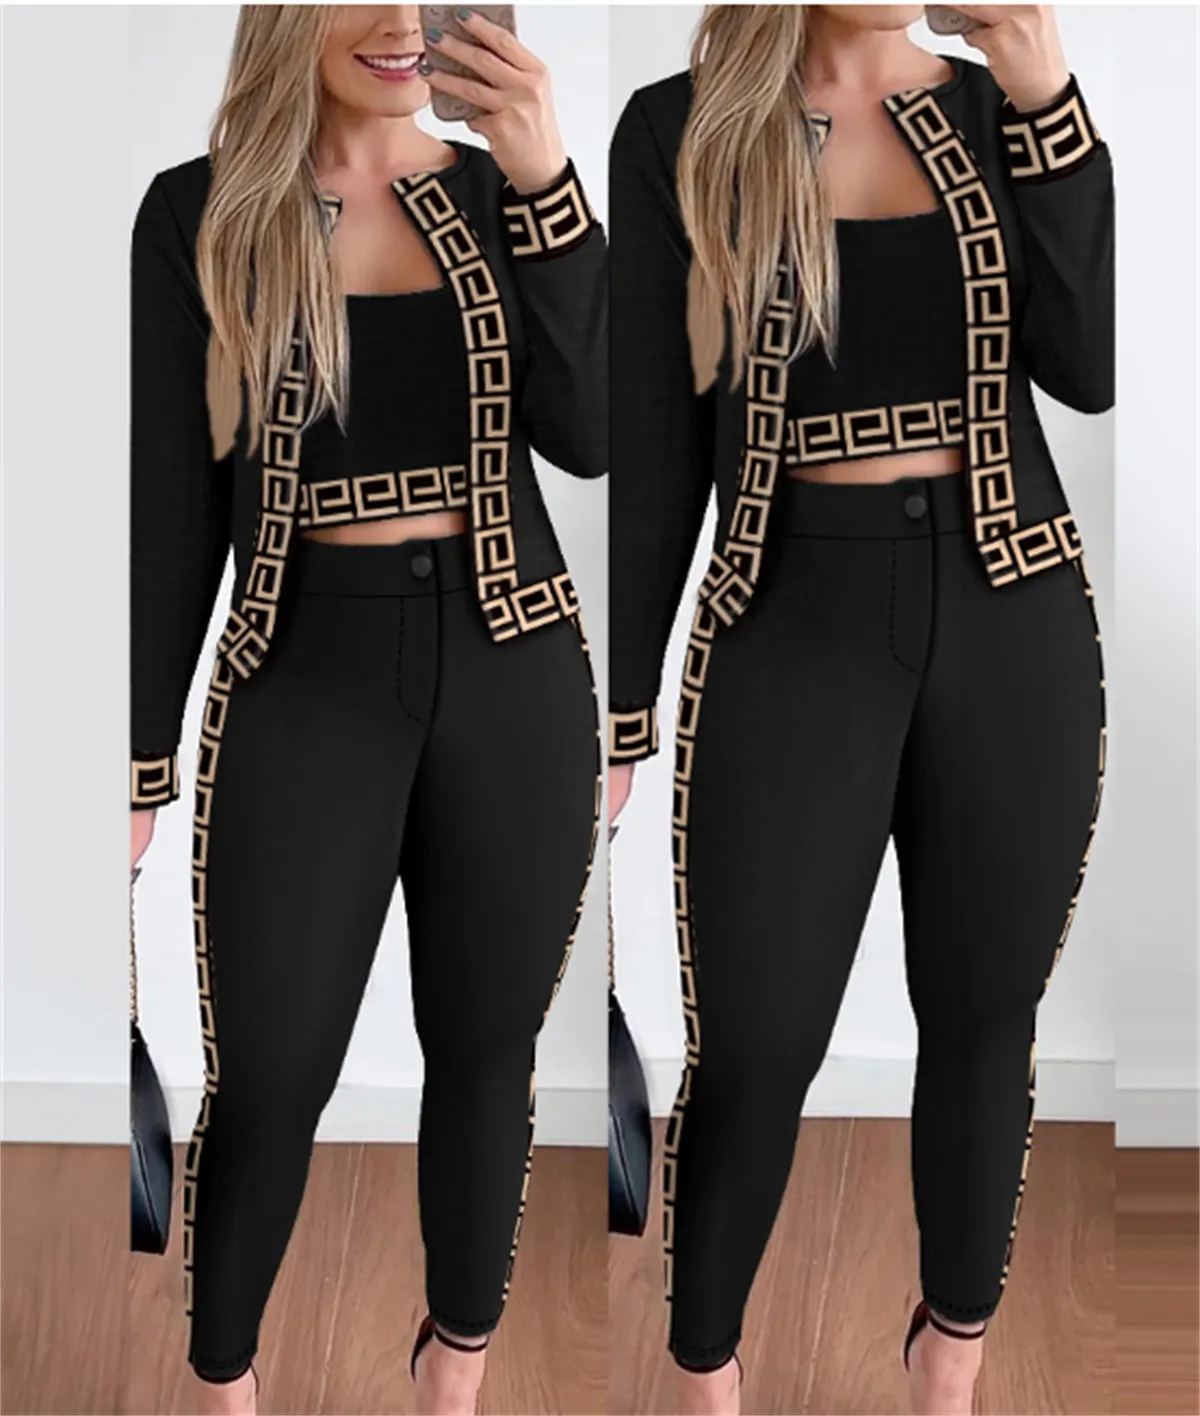 Women Tracksuits Casual Women Clothing Suits Three Pieces Sets Jackets tank and Pants Printed Long Sleeved Outfits Sports Sweatershirt Sets